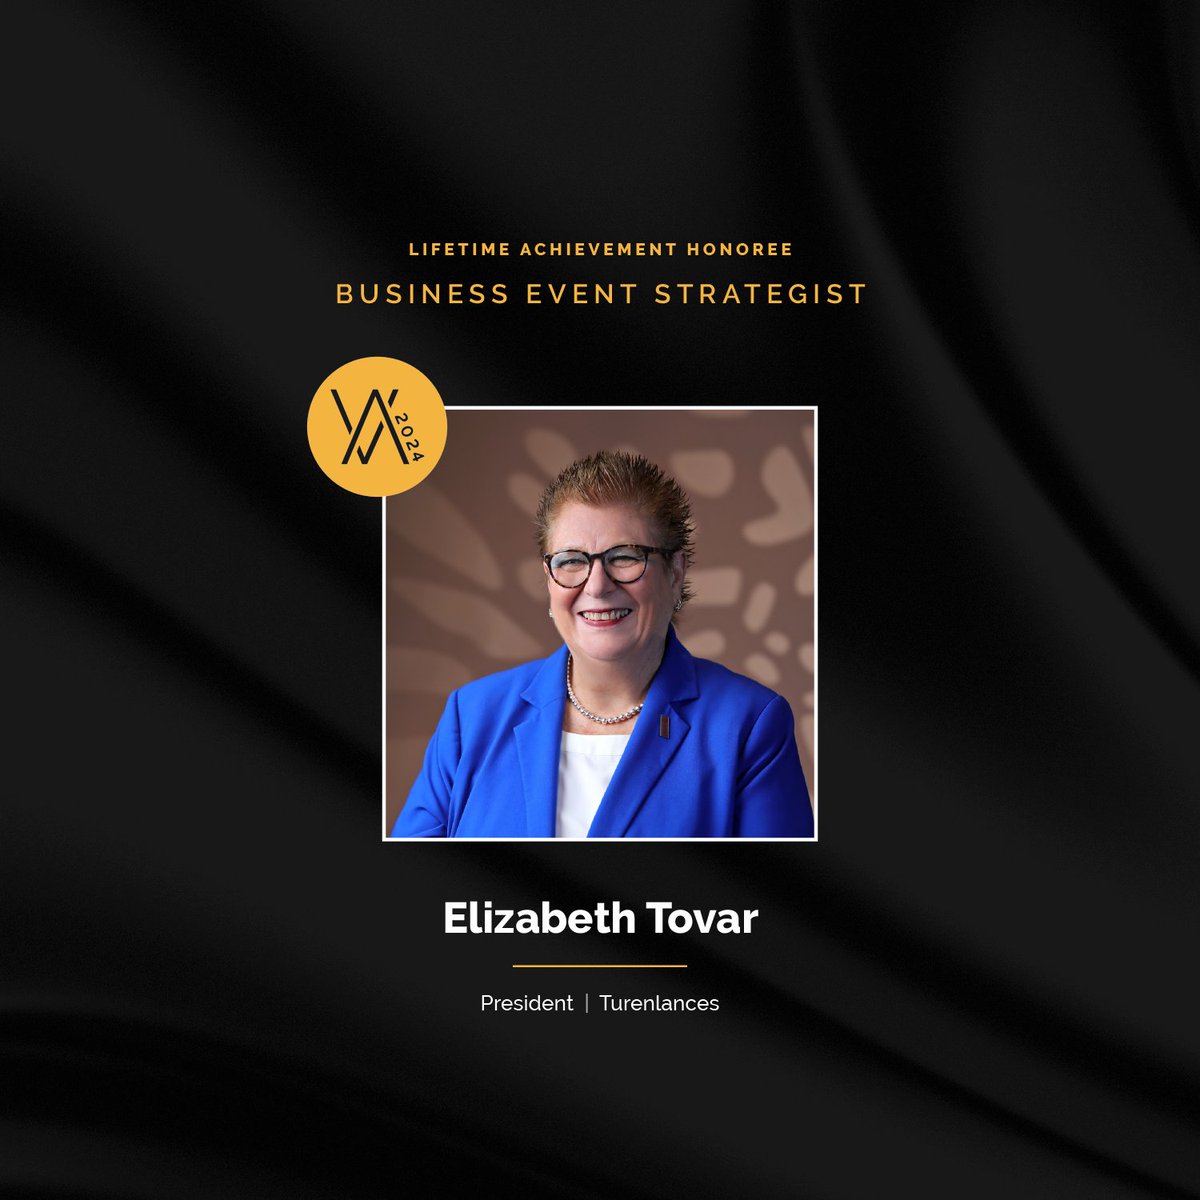 Congratulations to Elizabeth Tovar our 2024 Visionary Awards Lifetime Achievement Honoree for Business Event Strategist! Meet all the incredible honorees and finalists at the Visionary Awards during #BEIW24. Celebrate these exceptional stars! bit.ly/3HQmsqN #PCMA